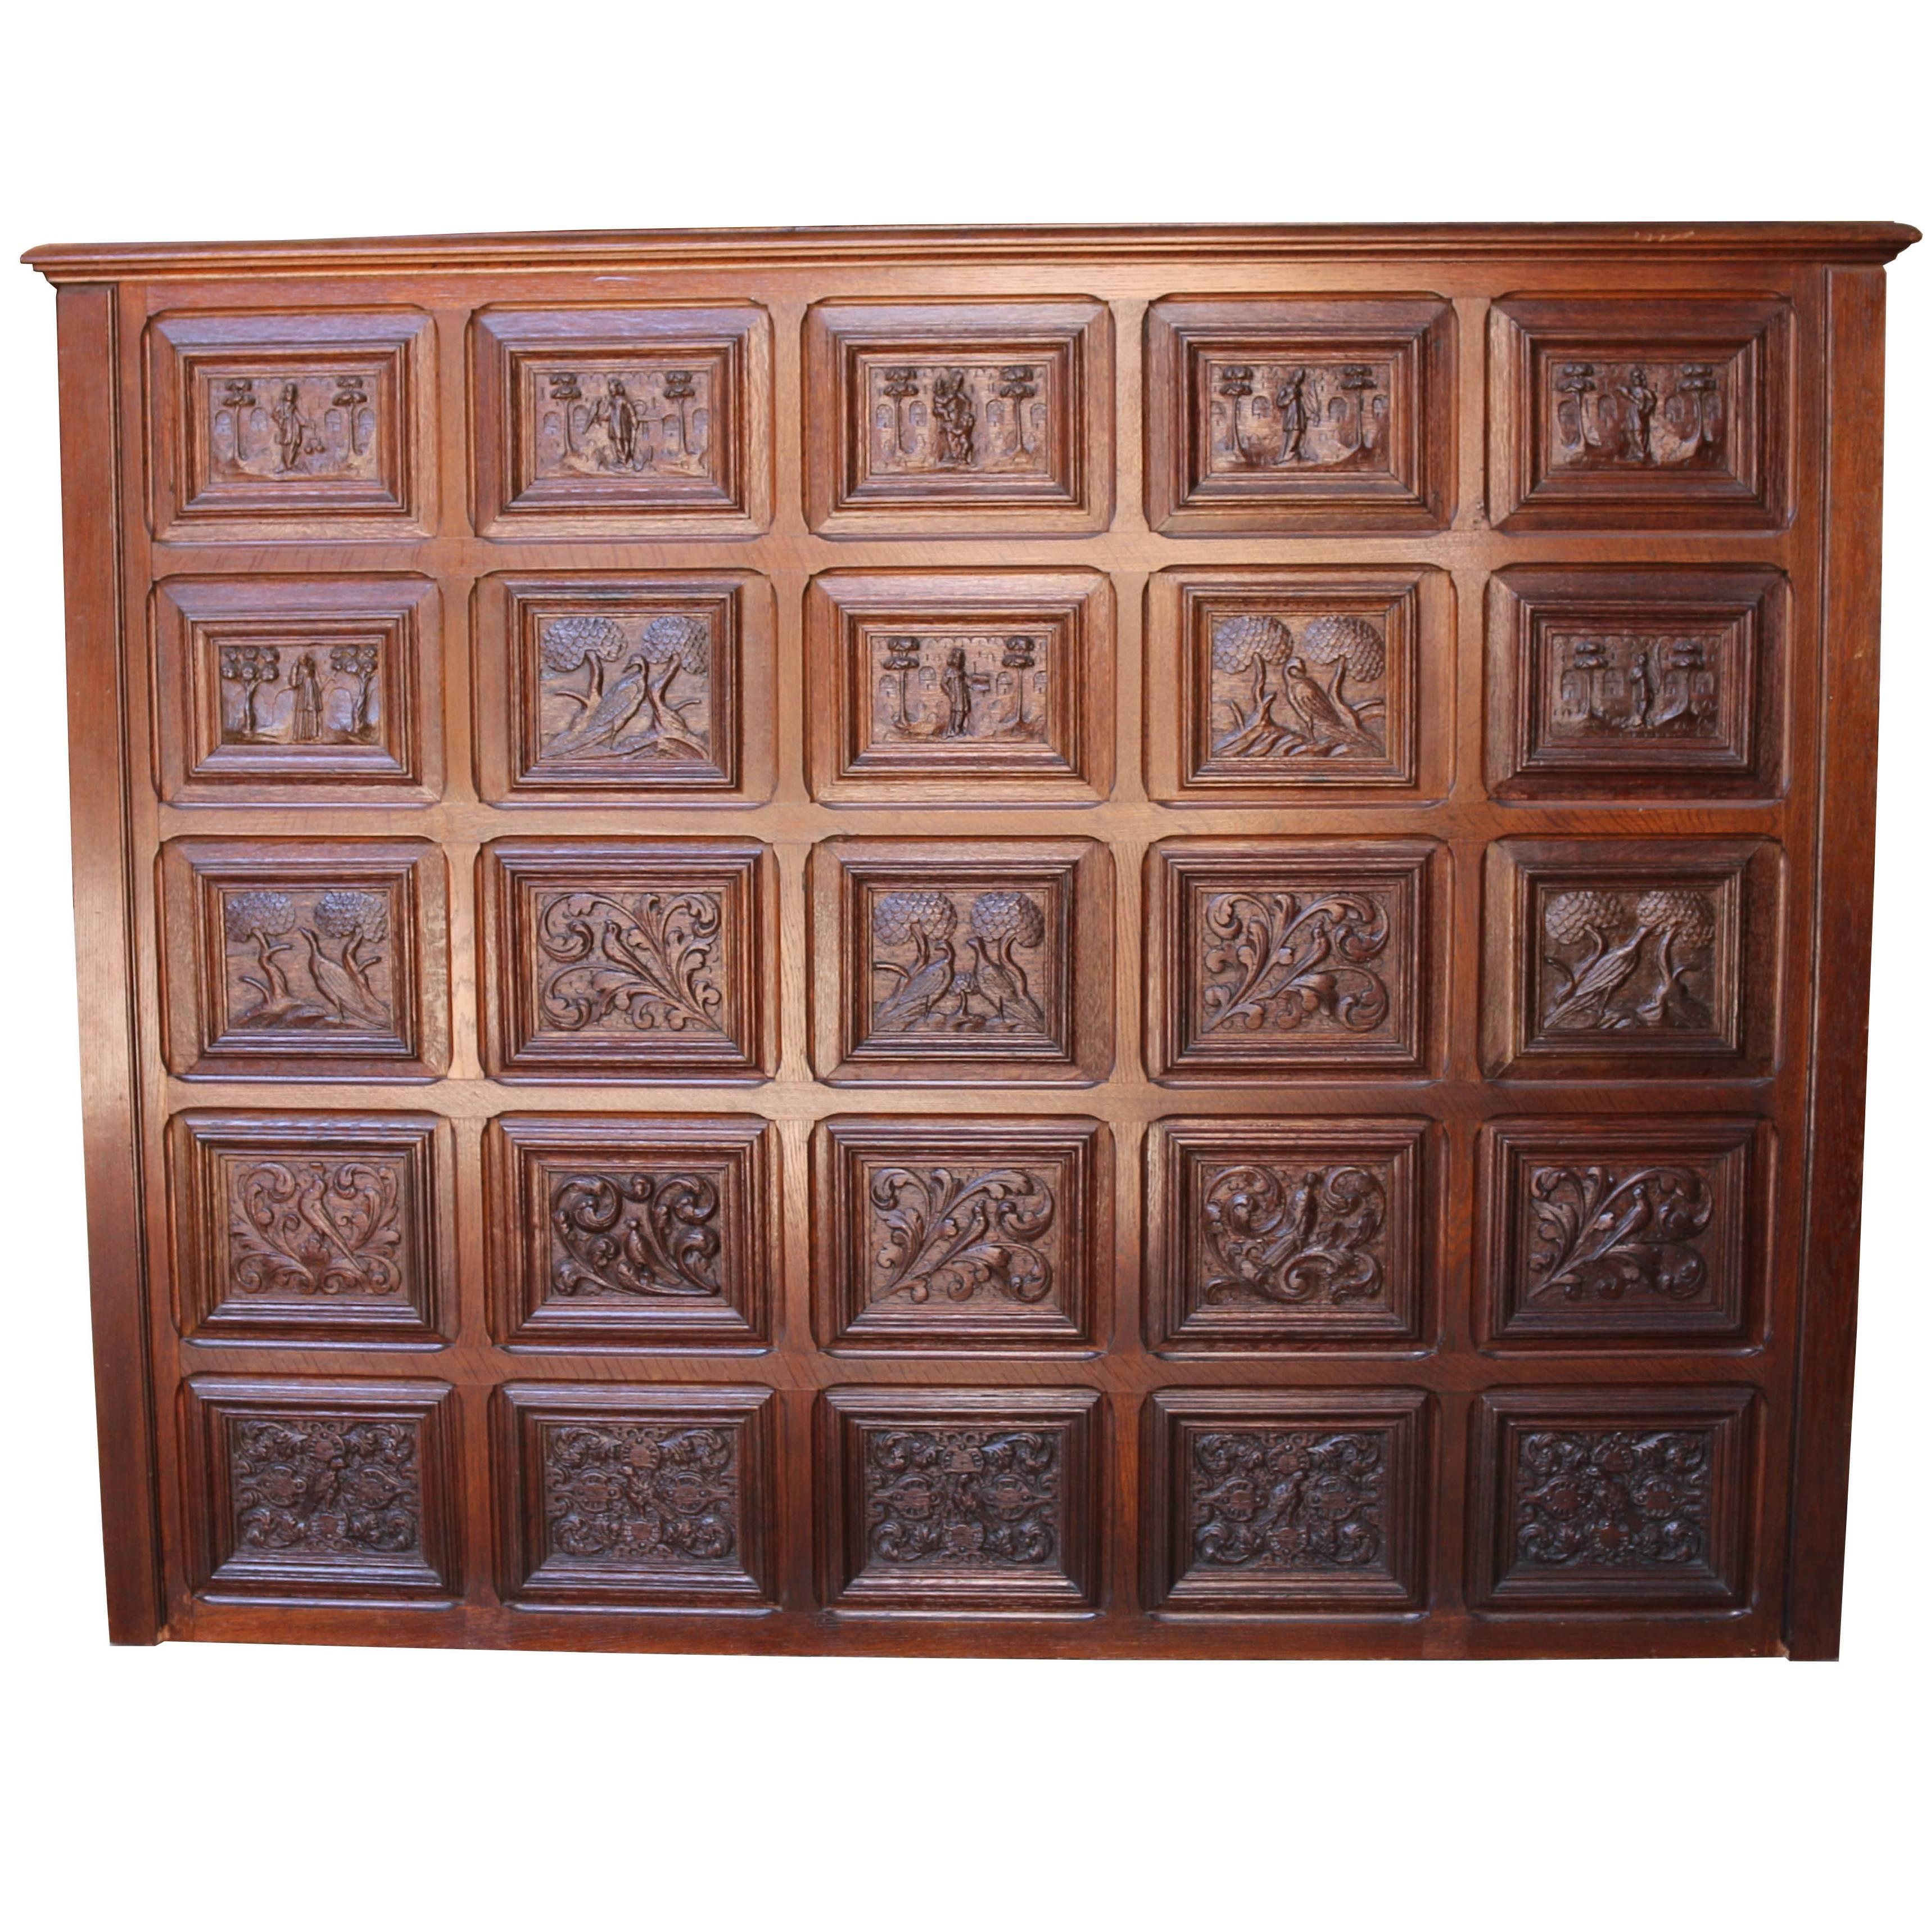 Antique English Carved Oak Wall Panel Decoration or Headboard